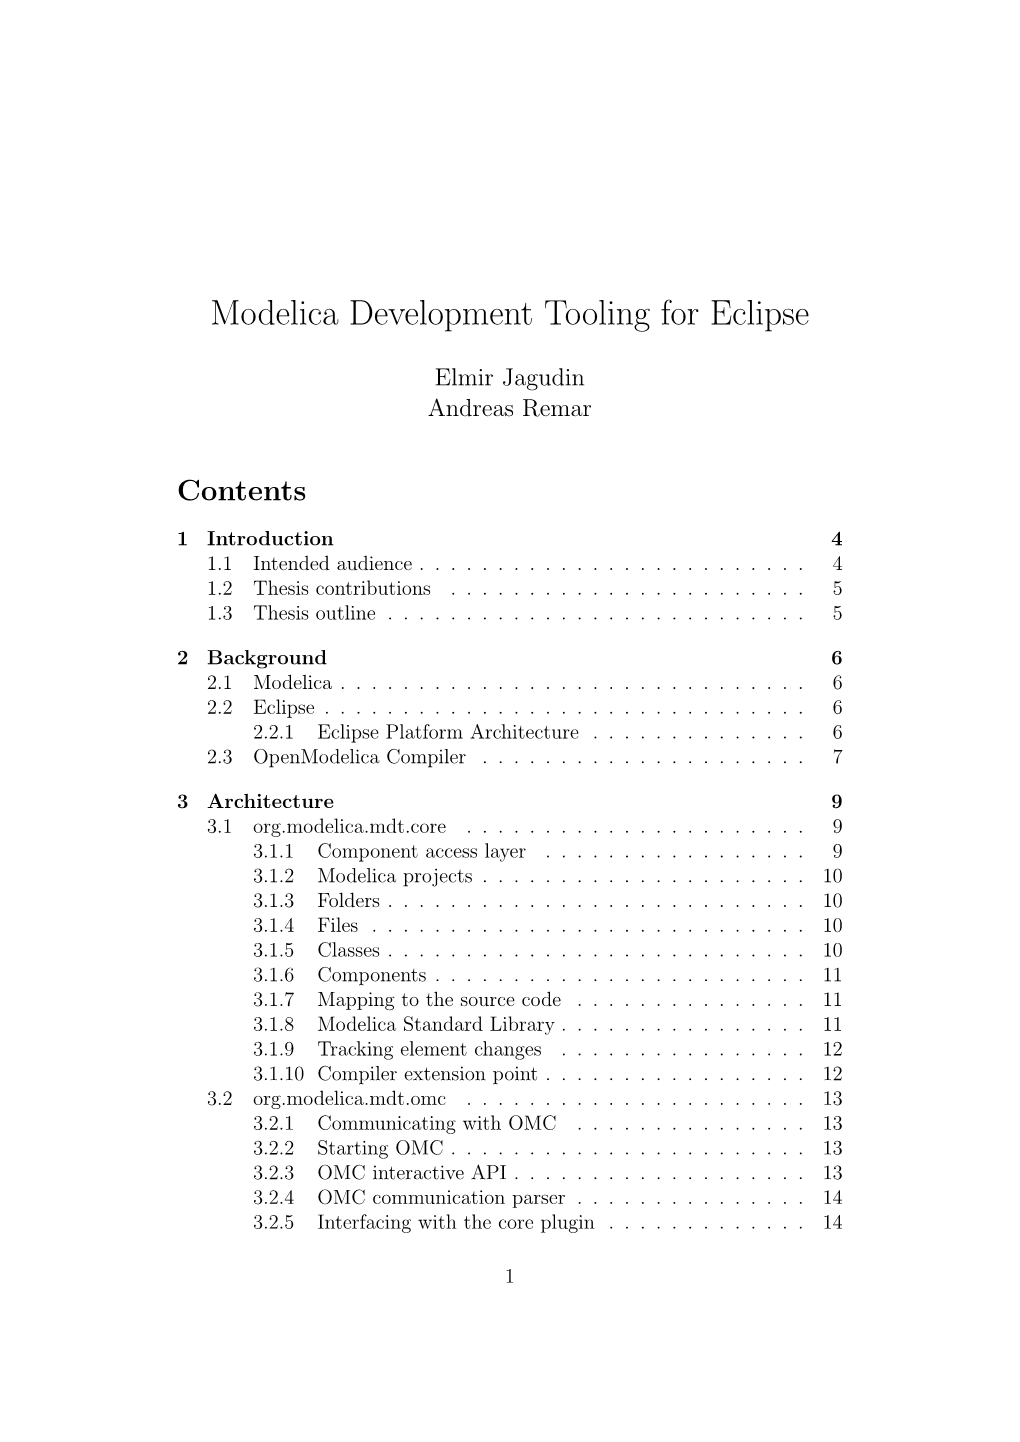 Modelica Development Tooling for Eclipse